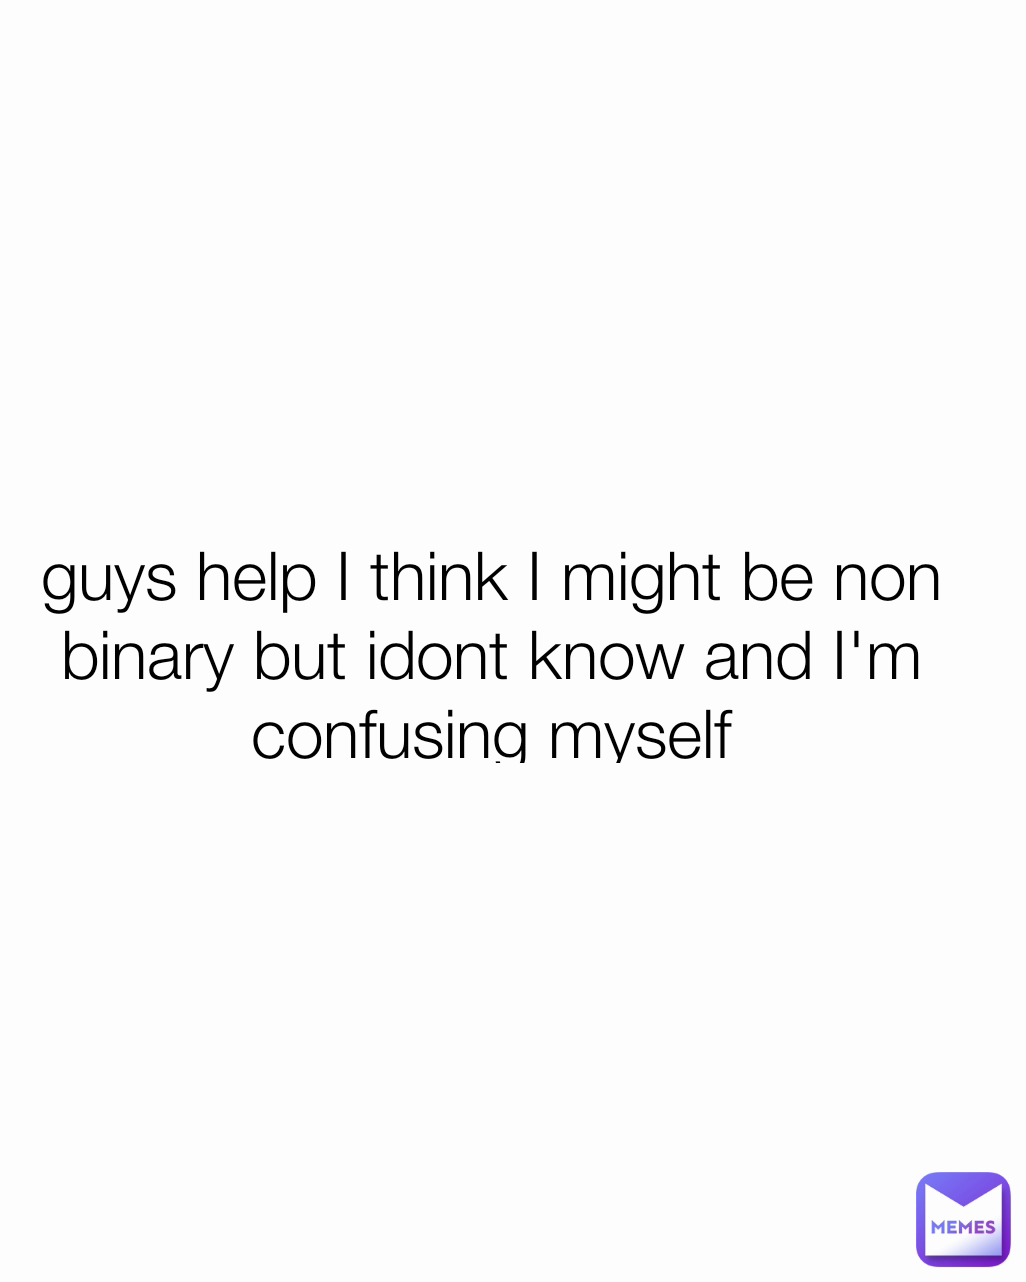 guys help I think I might be non binary but idont know and I'm confusing myself